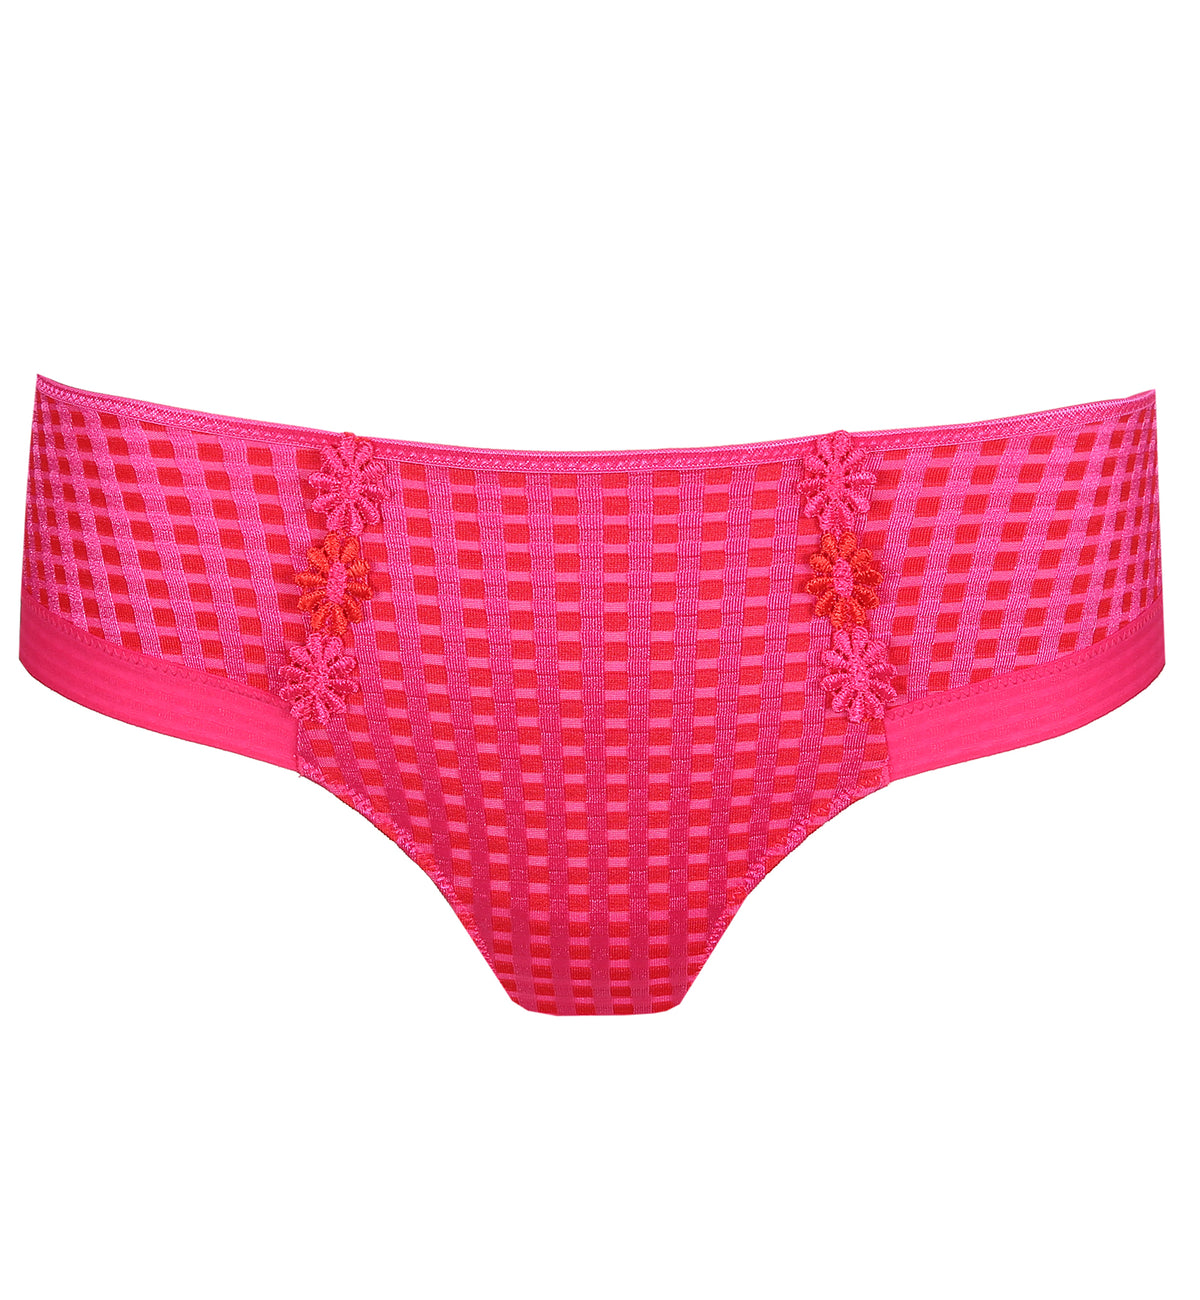 Marie Jo Avero Hotpants Panty (0500415),Small,Electric Pink - Electric Pink,Small